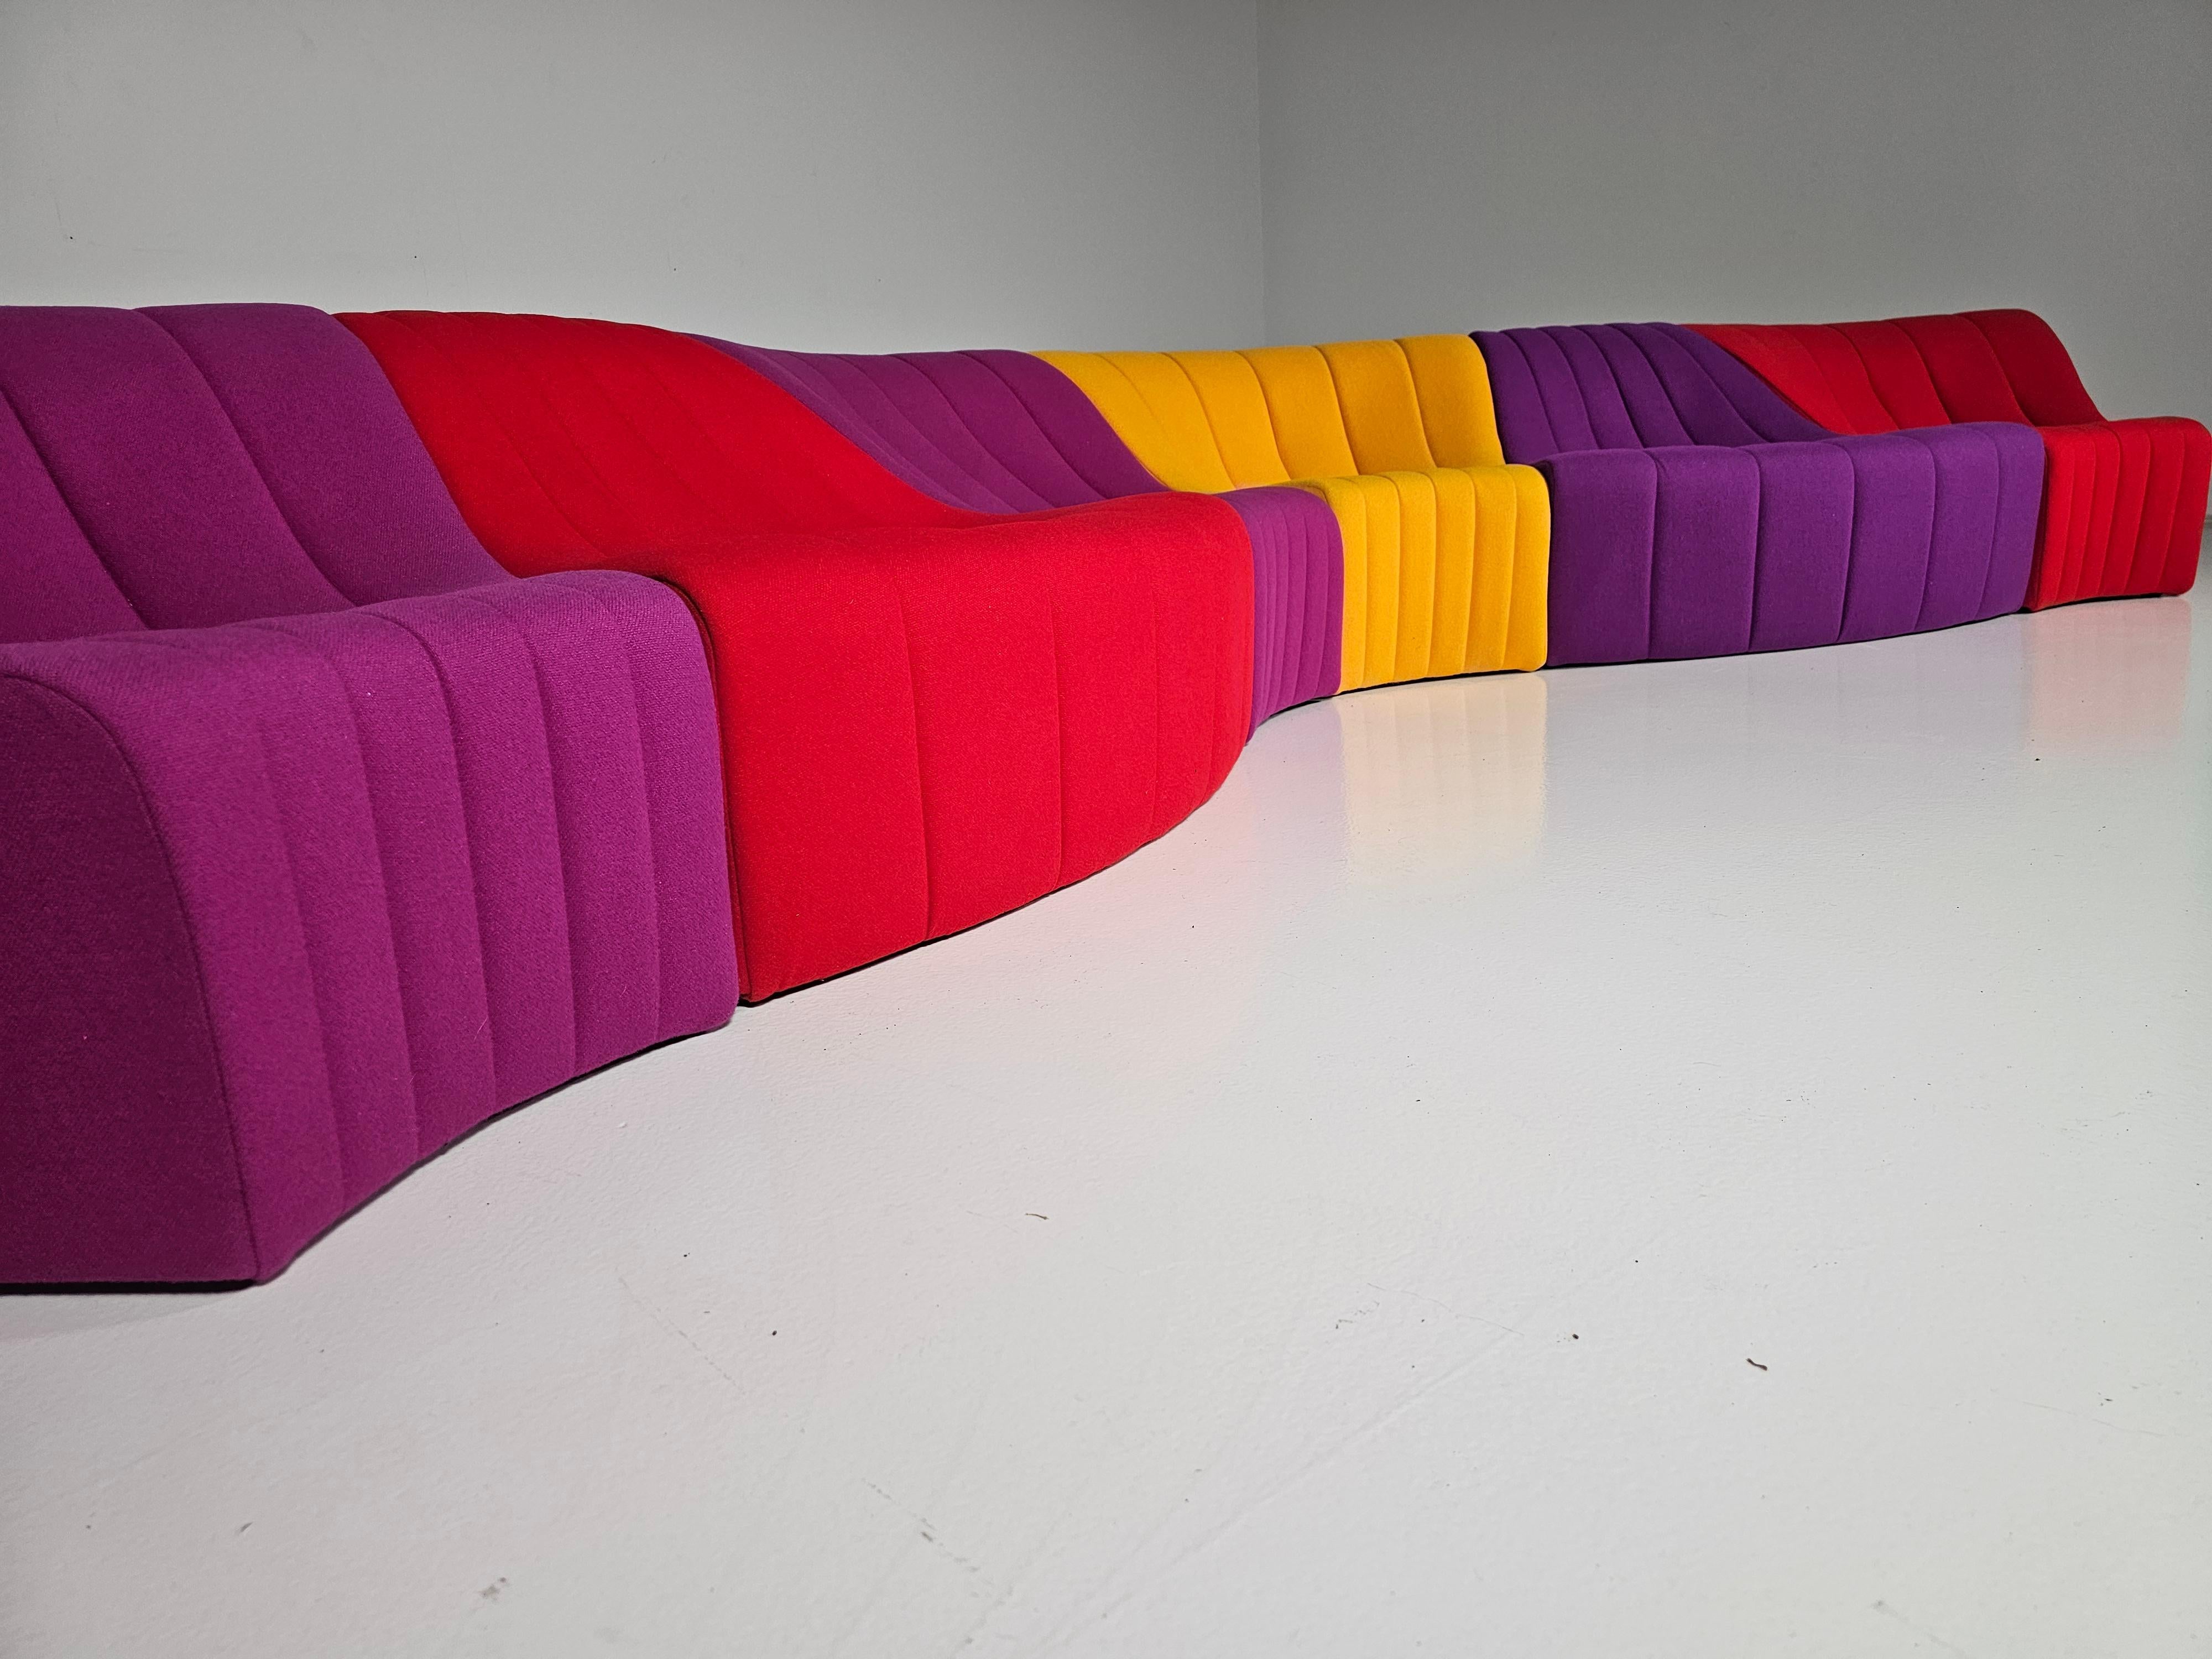 Fabric Kwok Hoi Chan 'Chromatic'  modular sofa in red, purple and yellow colors 